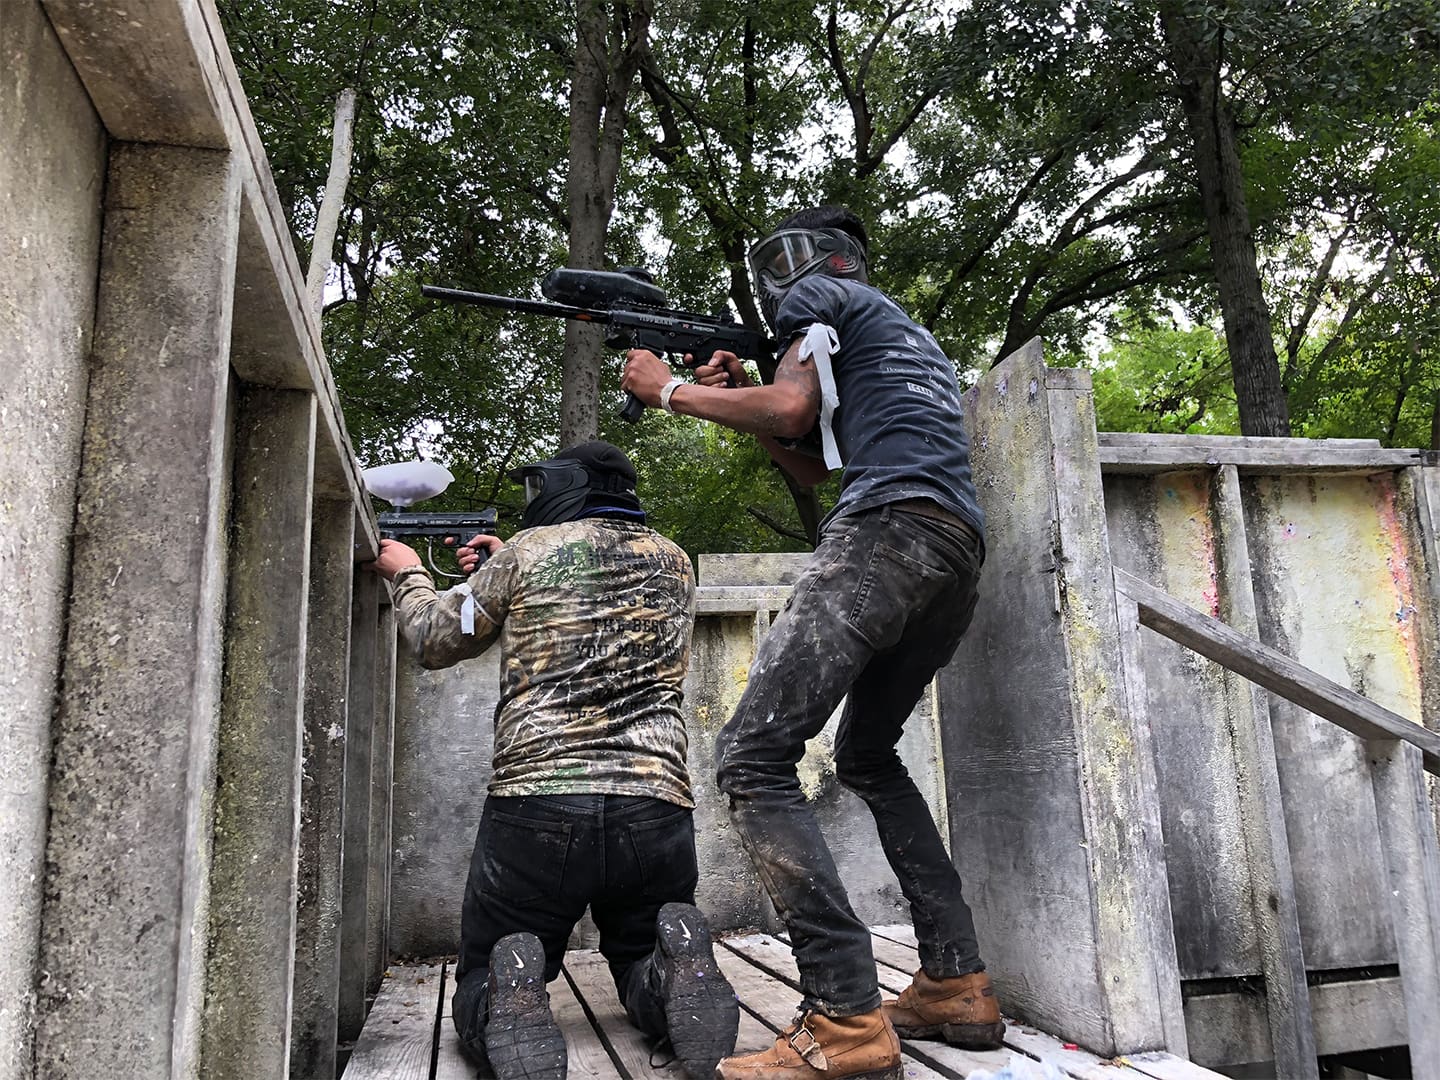 Two people in camouflage gear and helmets are playing paintball.